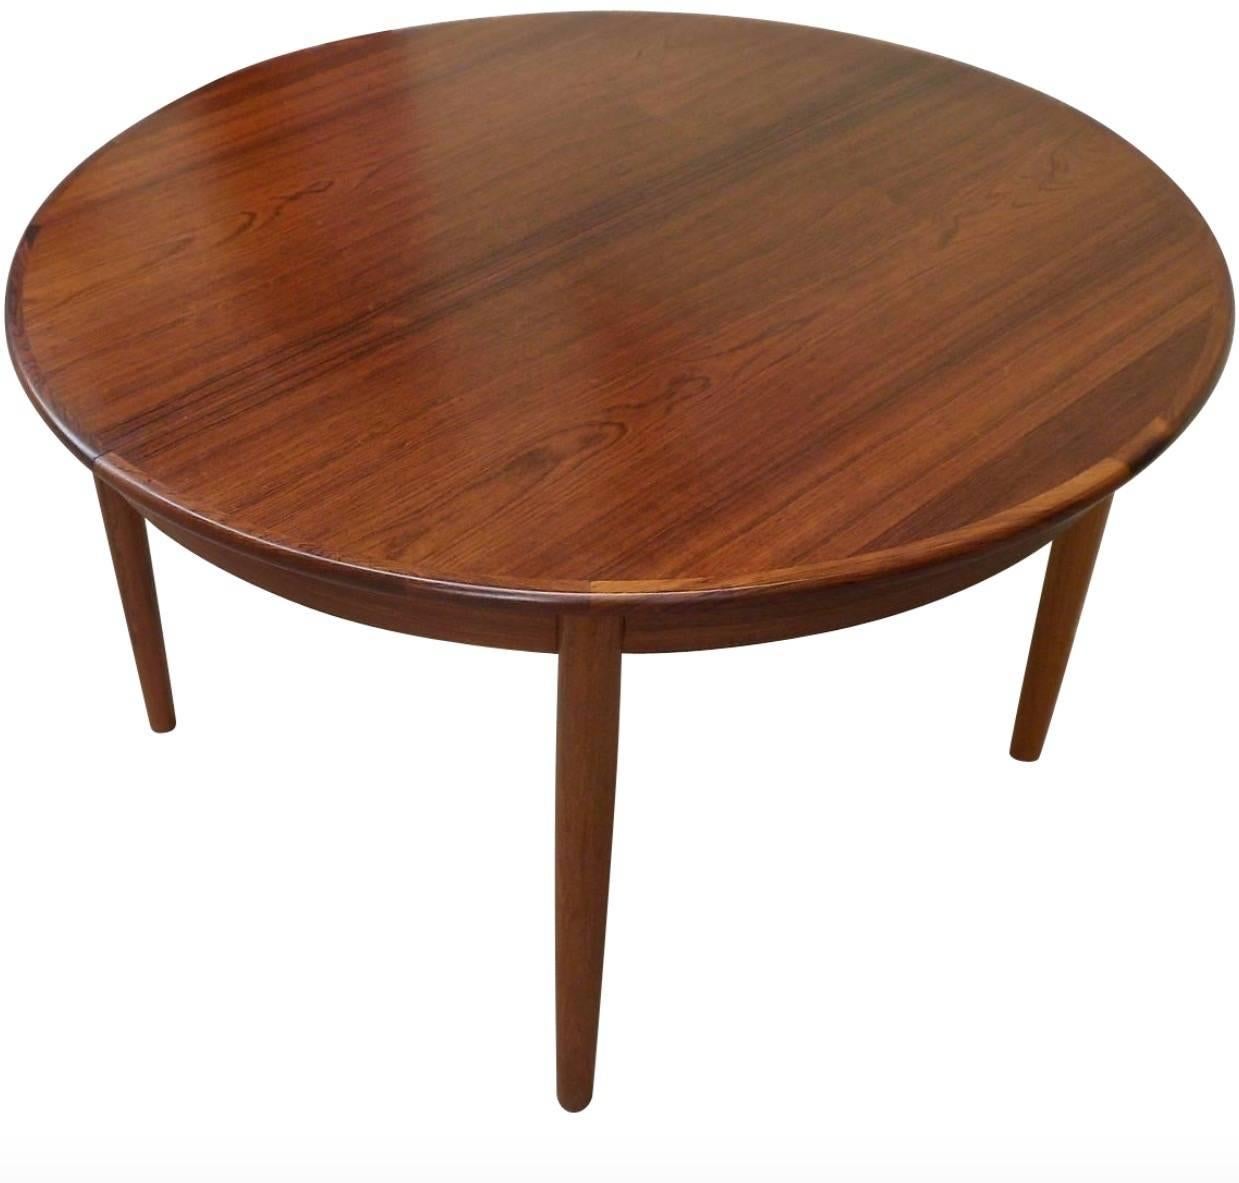 Danish Mid-Century Modern extendable rosewood dining table. Table sits round at 46" and had two matching 19.5" rosewood leaves. With leaves the table can seat eight diners comfortably-at 85" extended. Table and leaves have just been